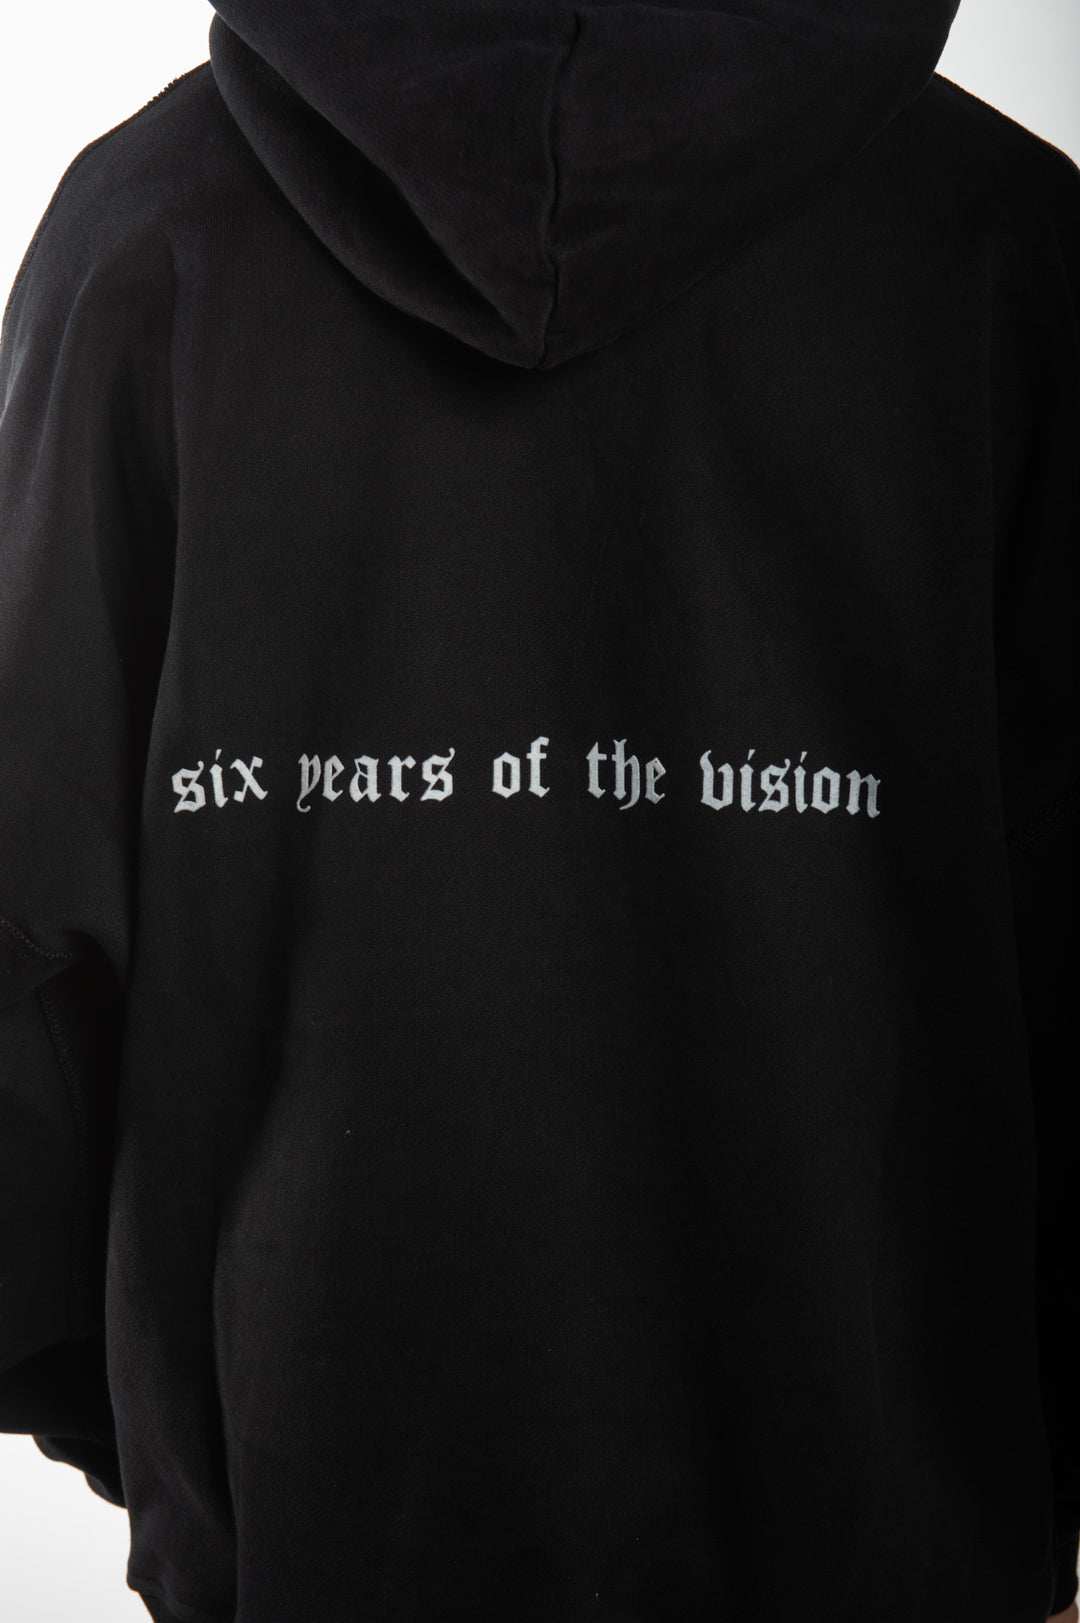 “SIX YEARS OF THE VISION” Oversized Hoodie